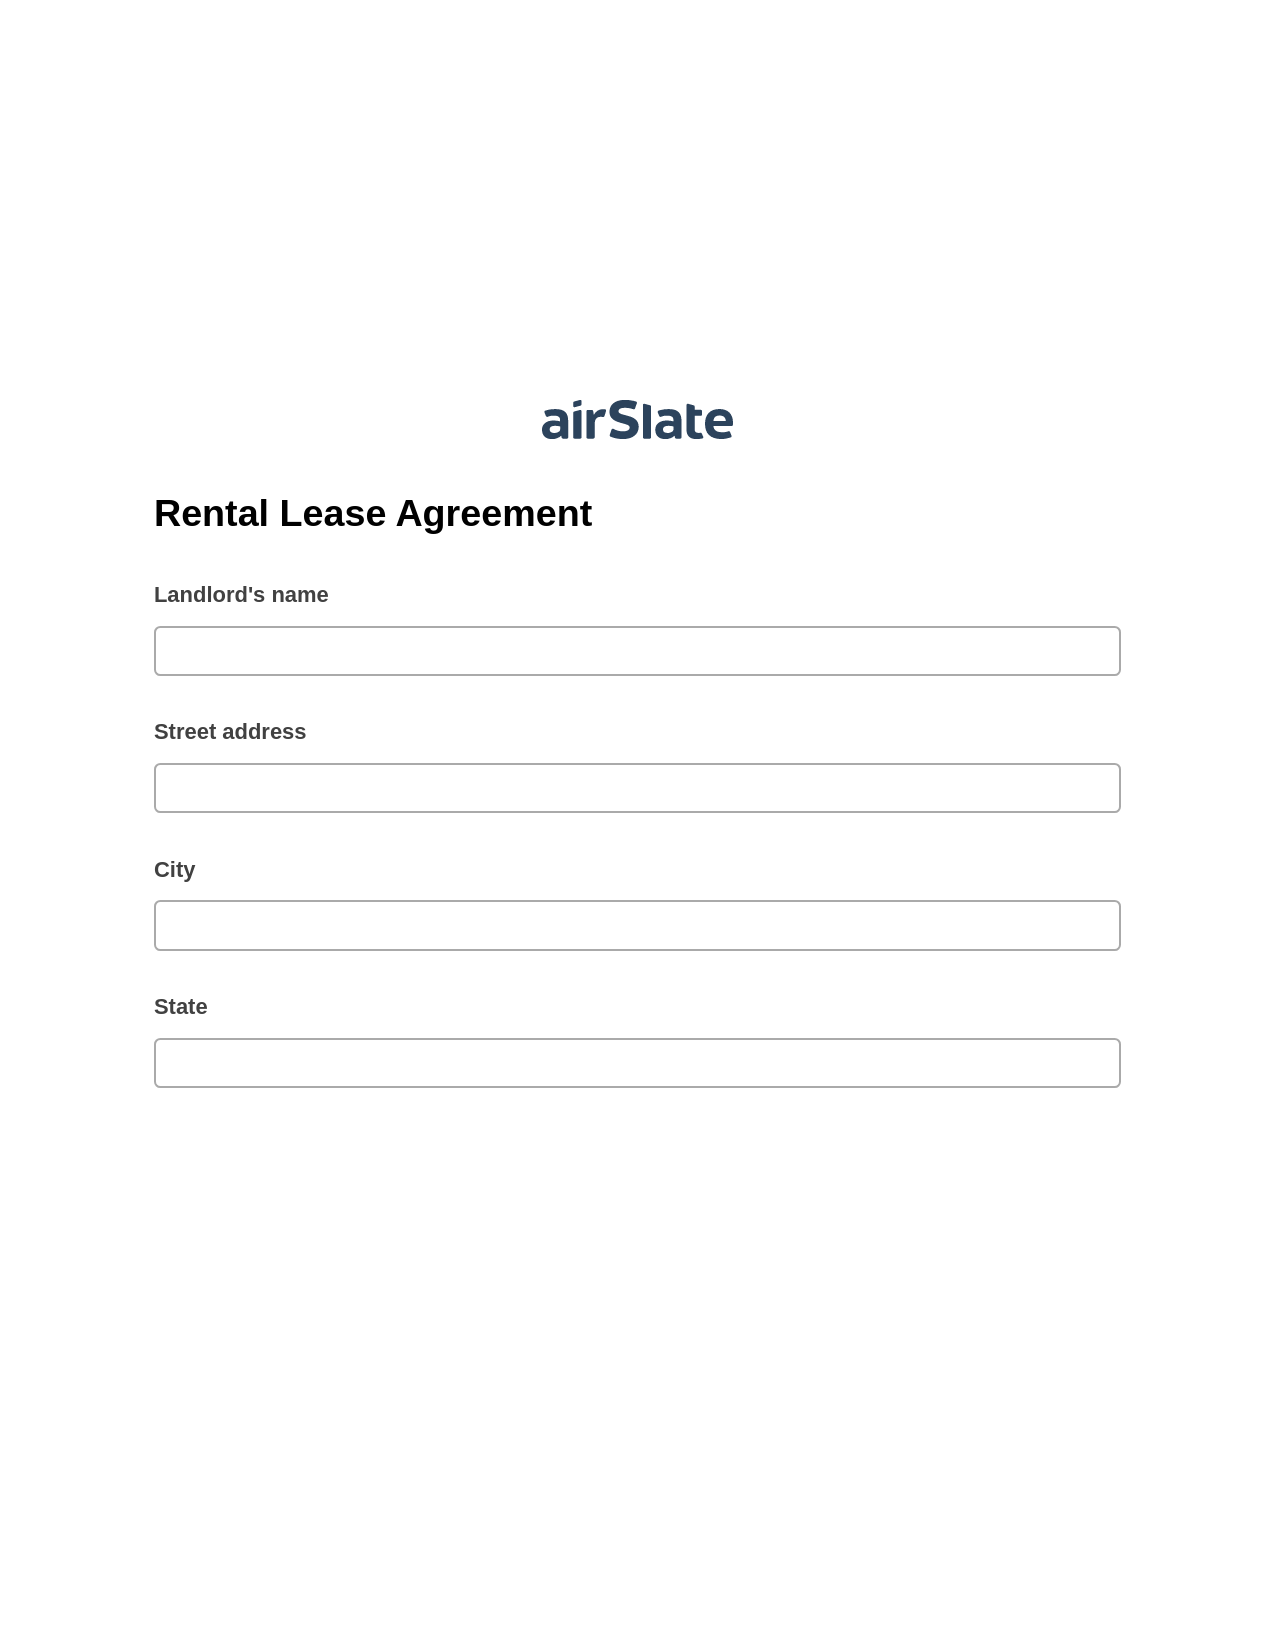 Rental Lease Agreement Pre-fill from Excel Spreadsheet Bot, Create Salesforce Record Bot, Export to Salesforce Bot